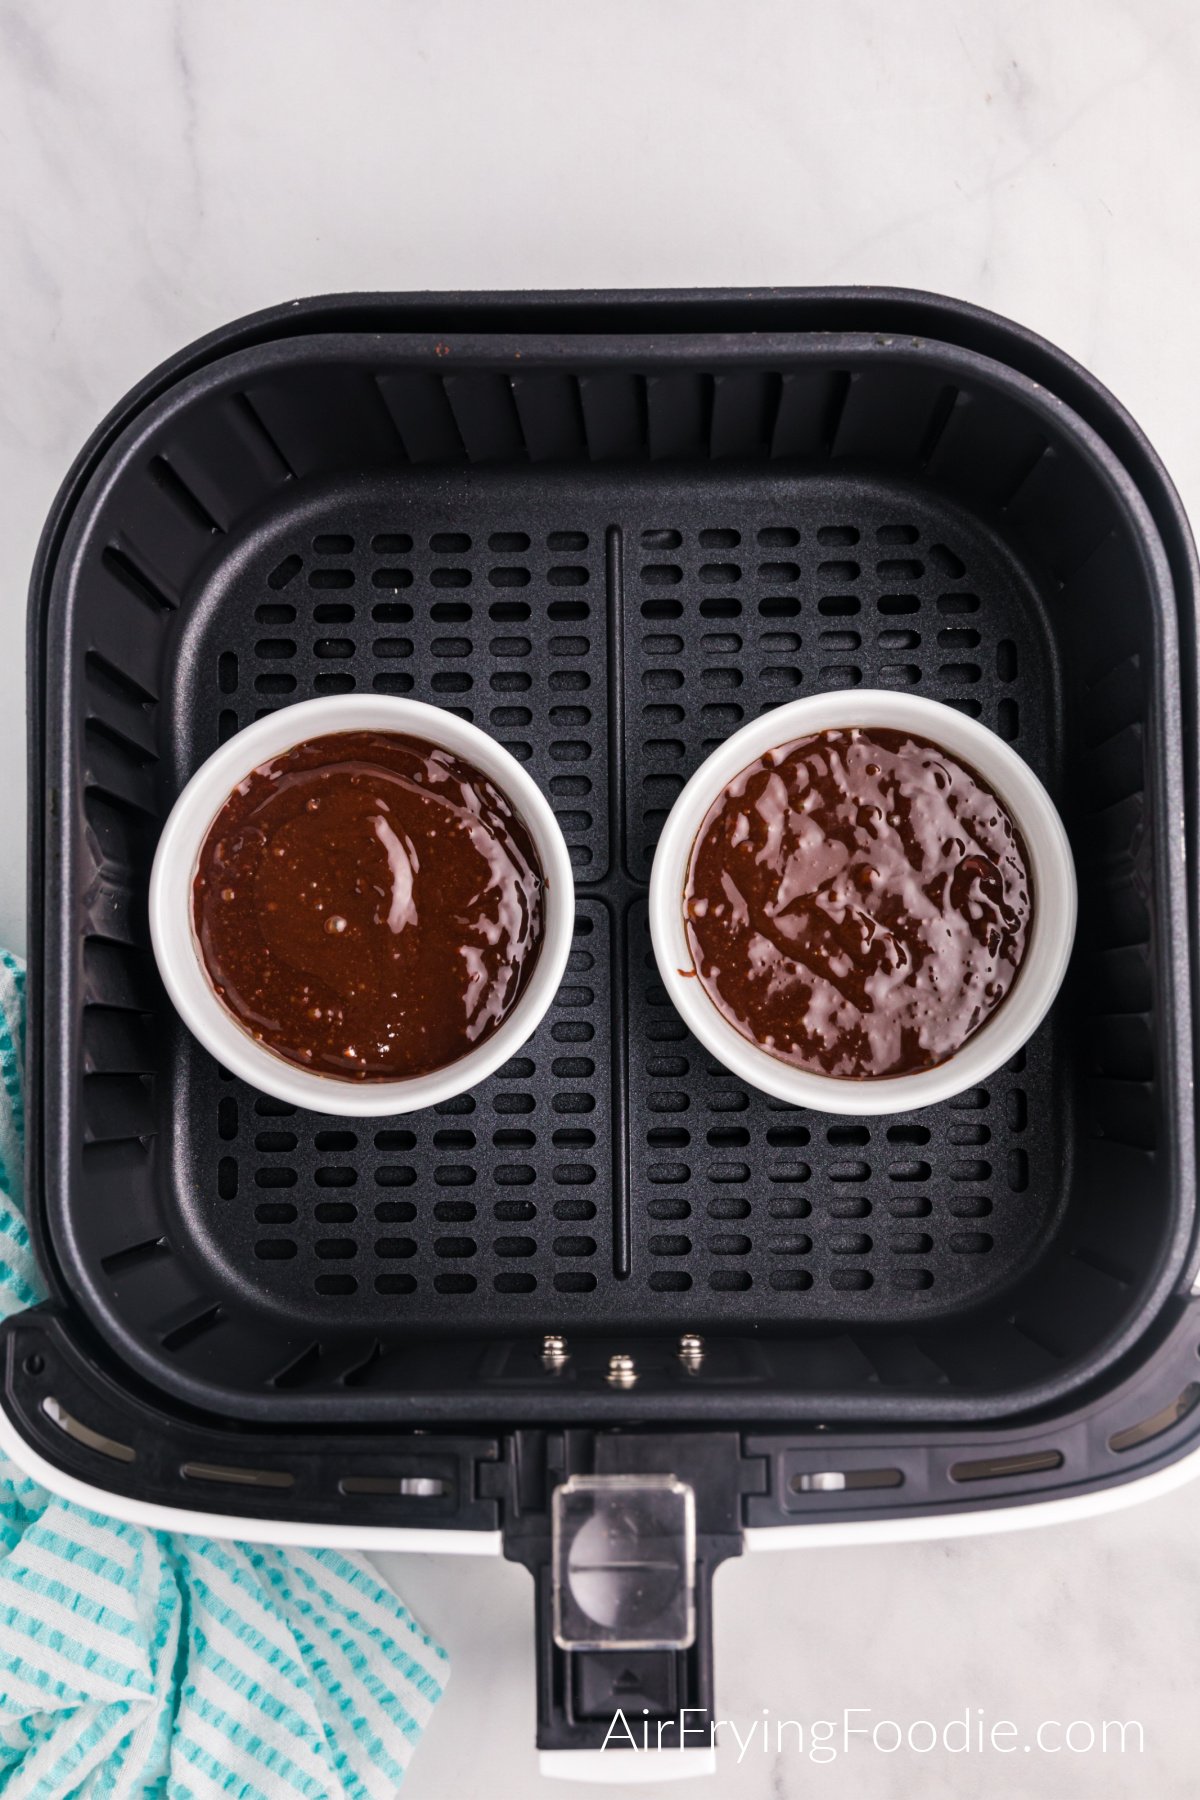 Chocolate batter poured into ramekins and placed into the basket of the air fryer.